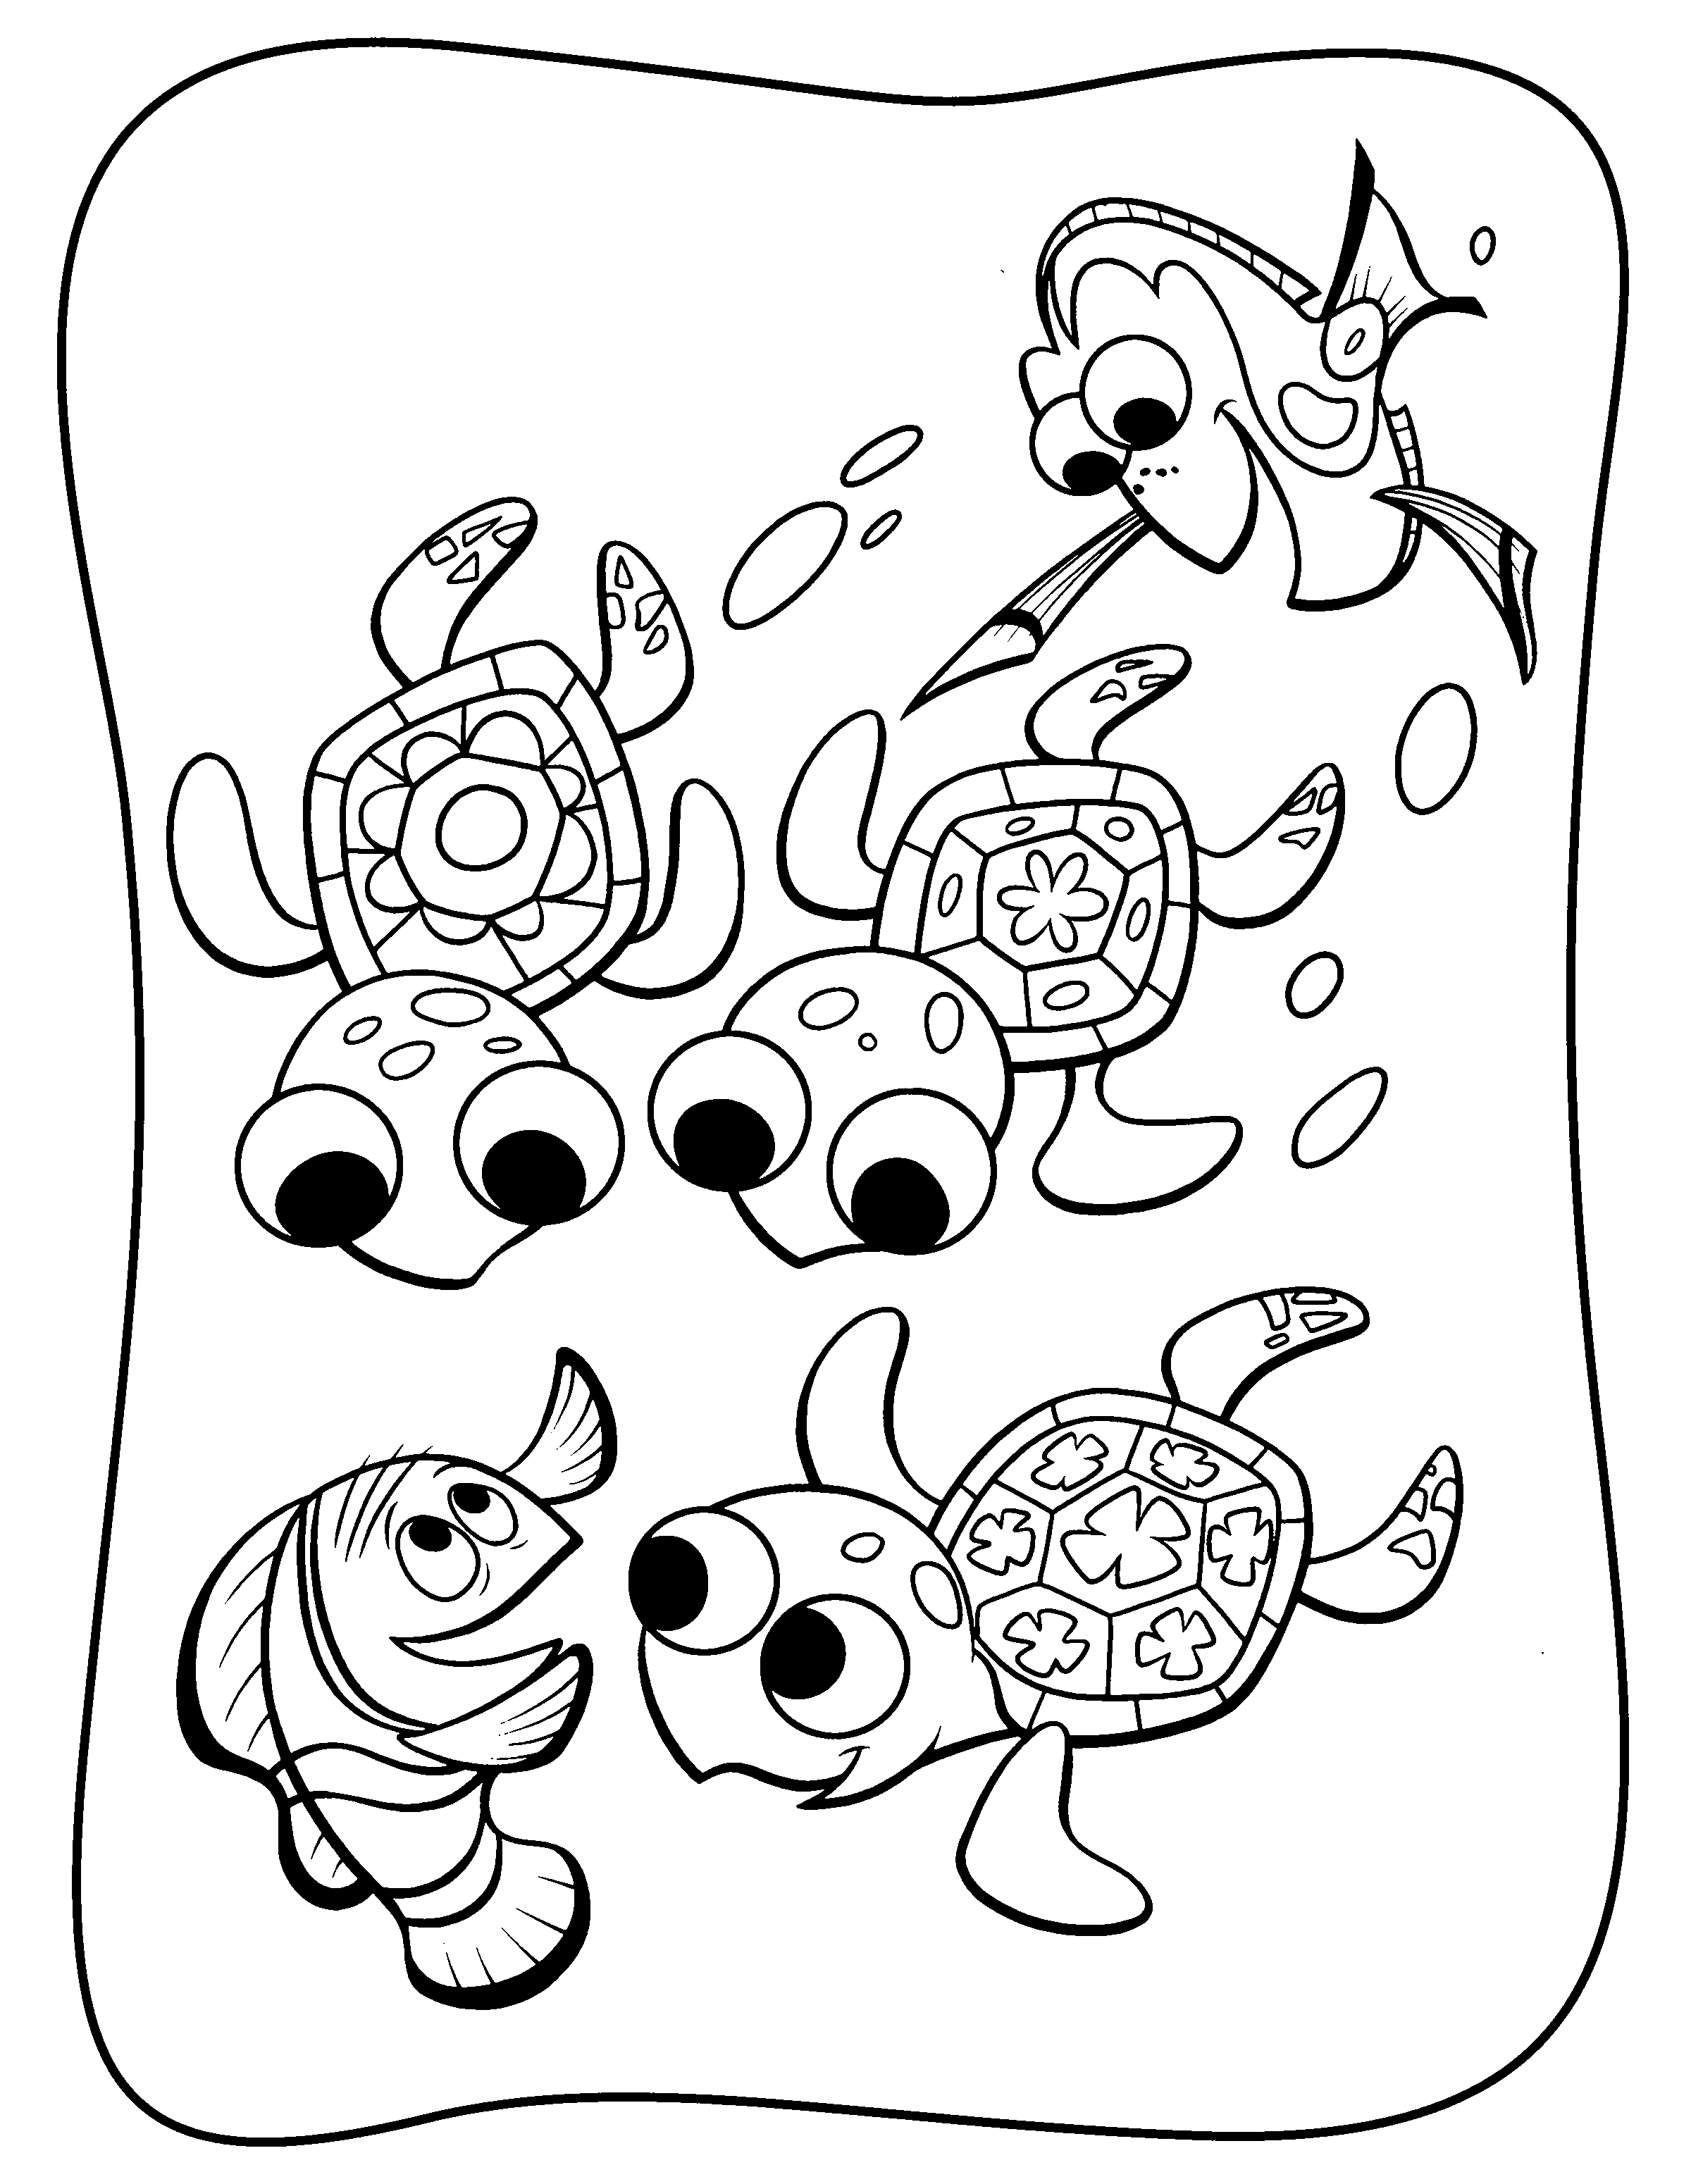 Download Dorys Coloring Page